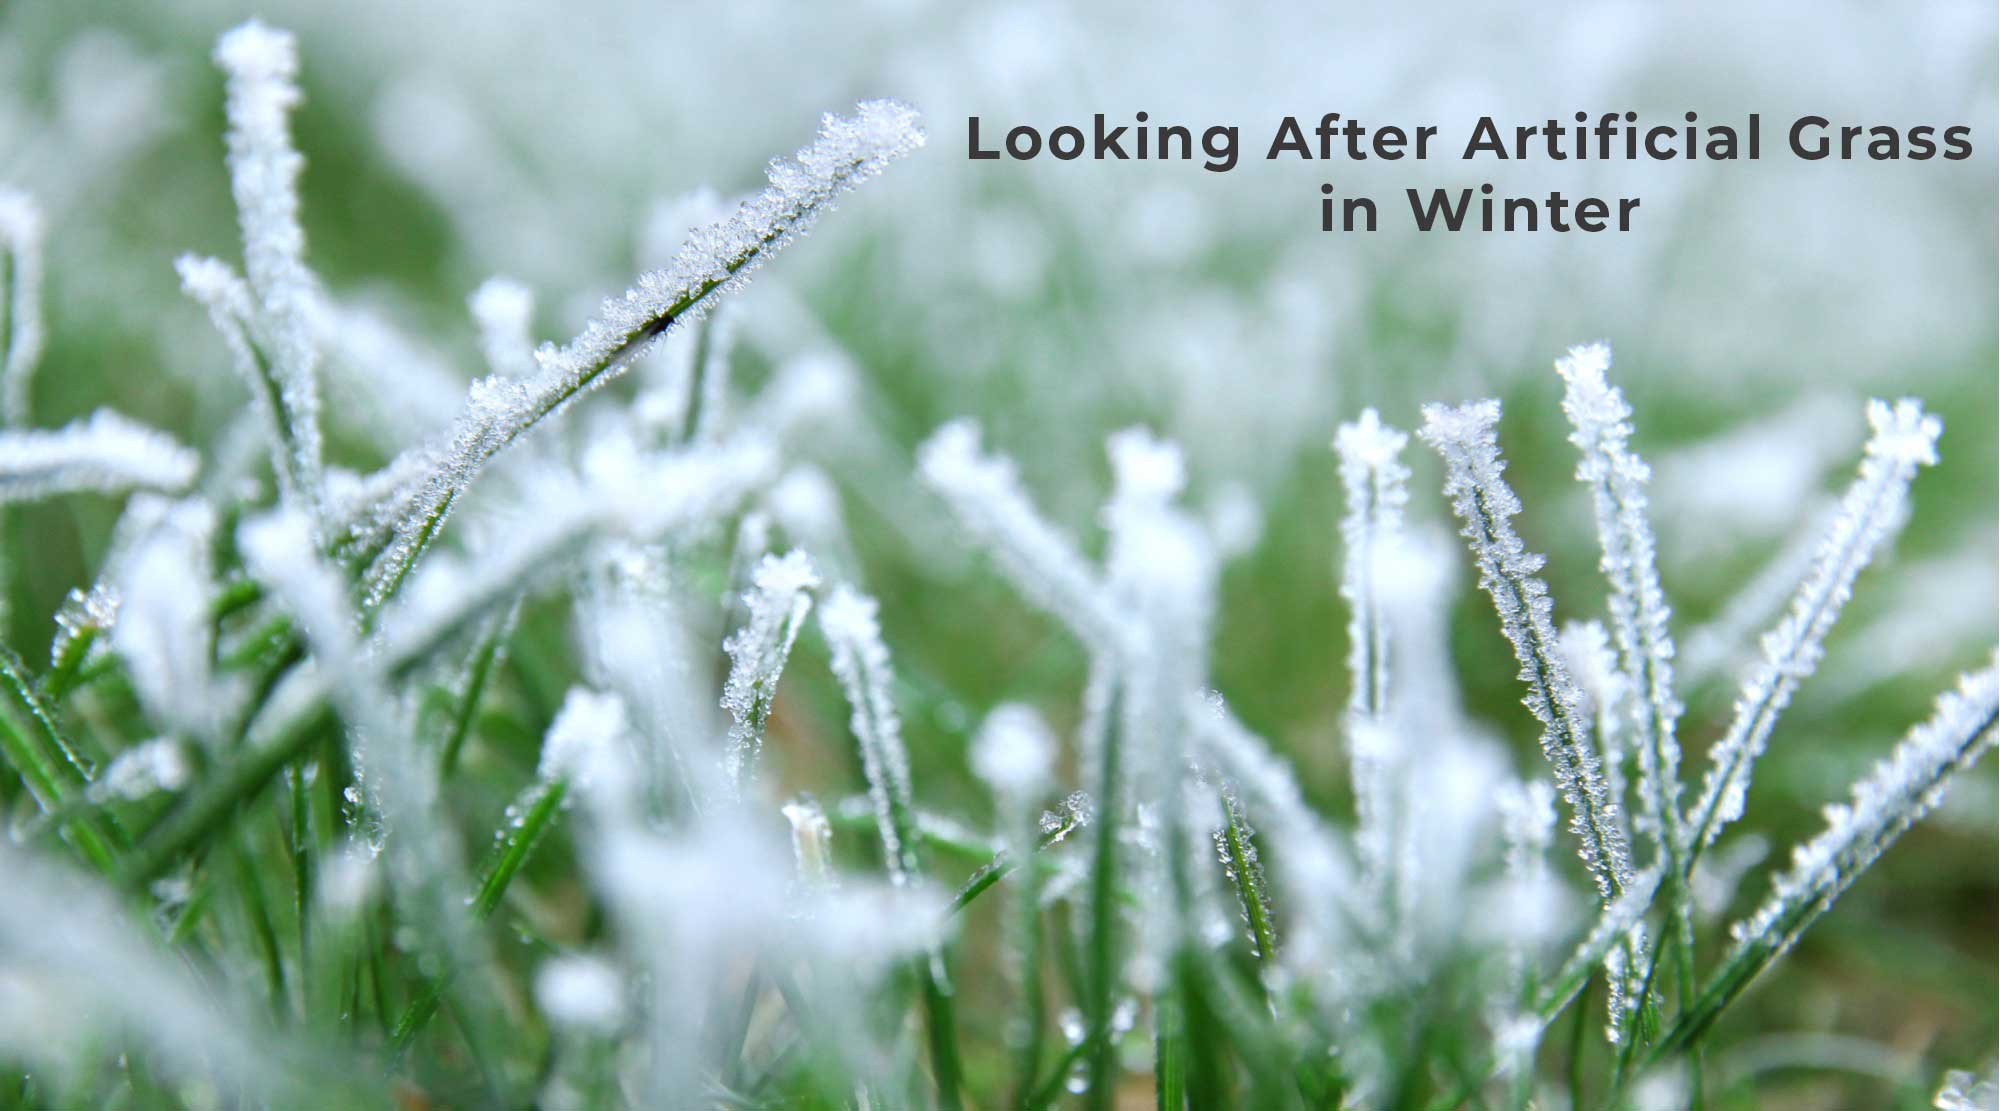 Looking After Artificial Grass in Winter